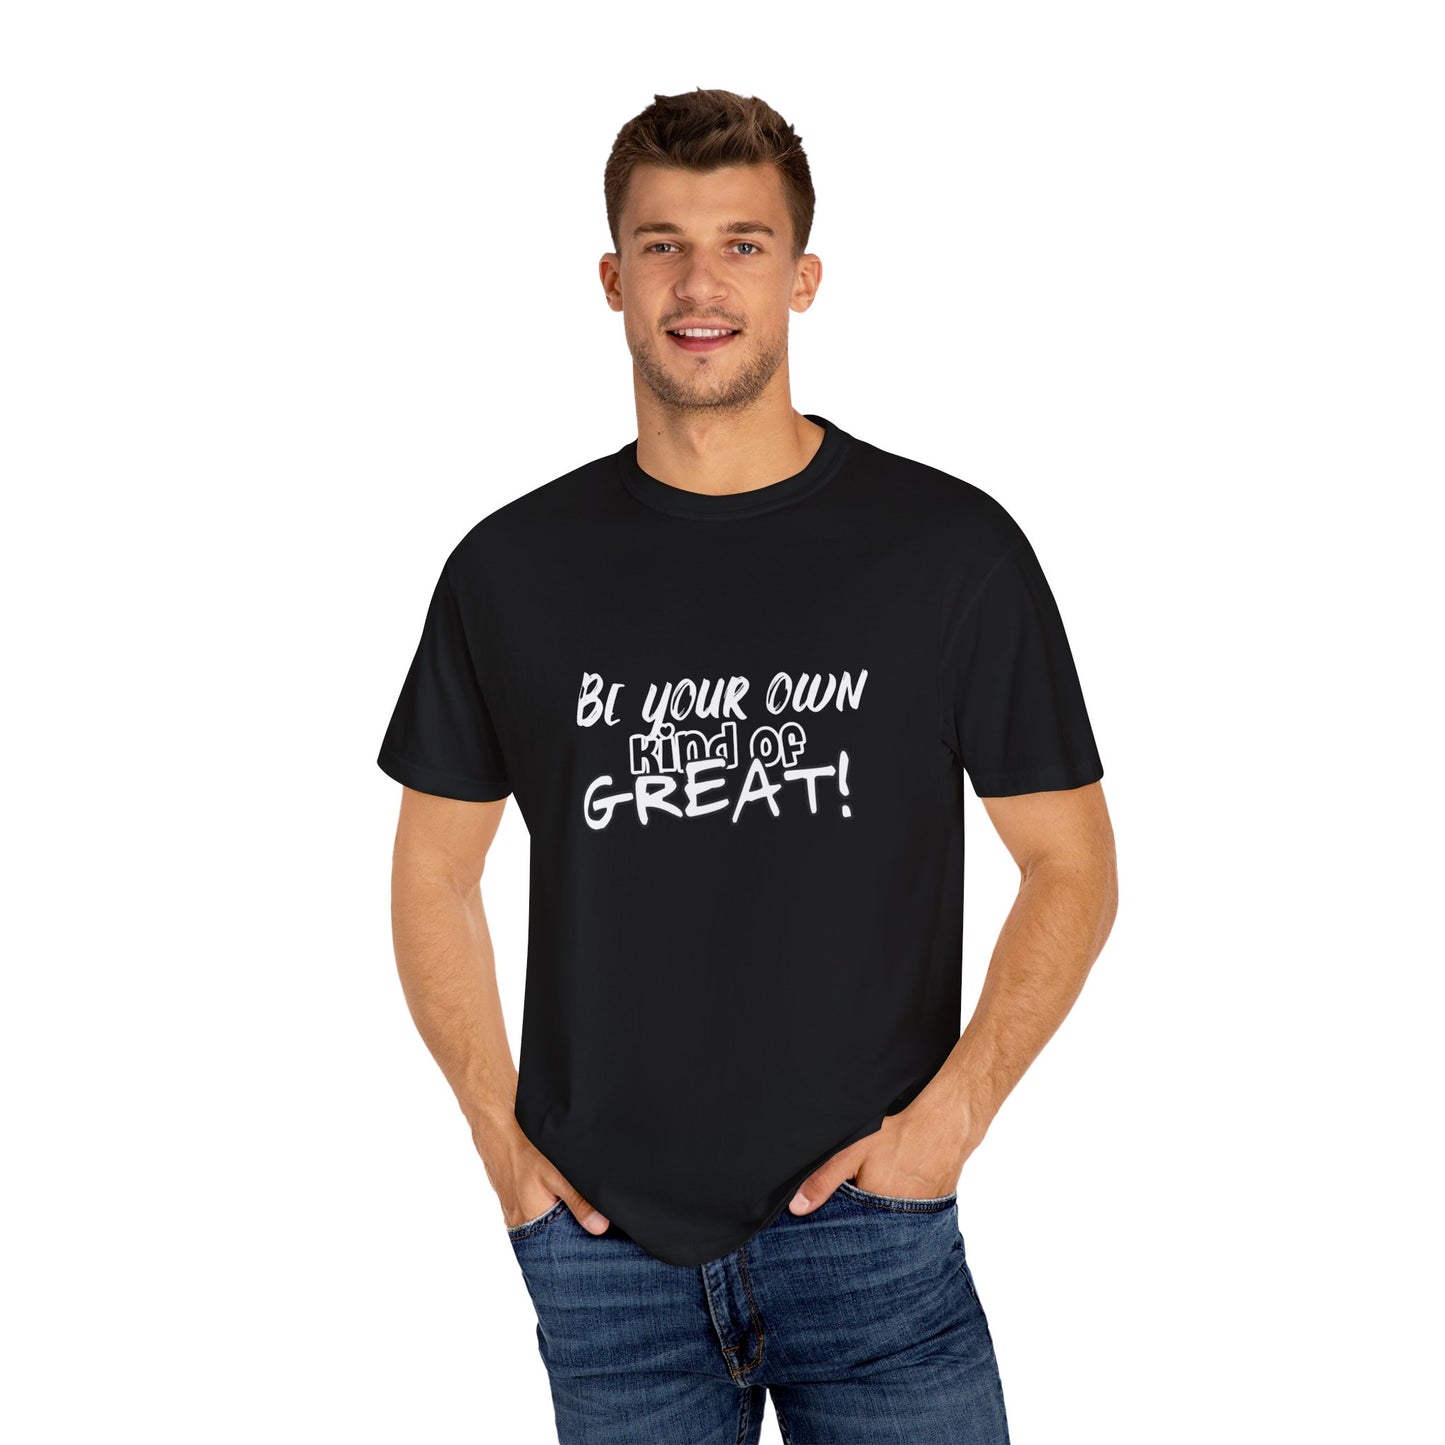 Be your own Tee (Unisex Garment-Dyed T-shirt)